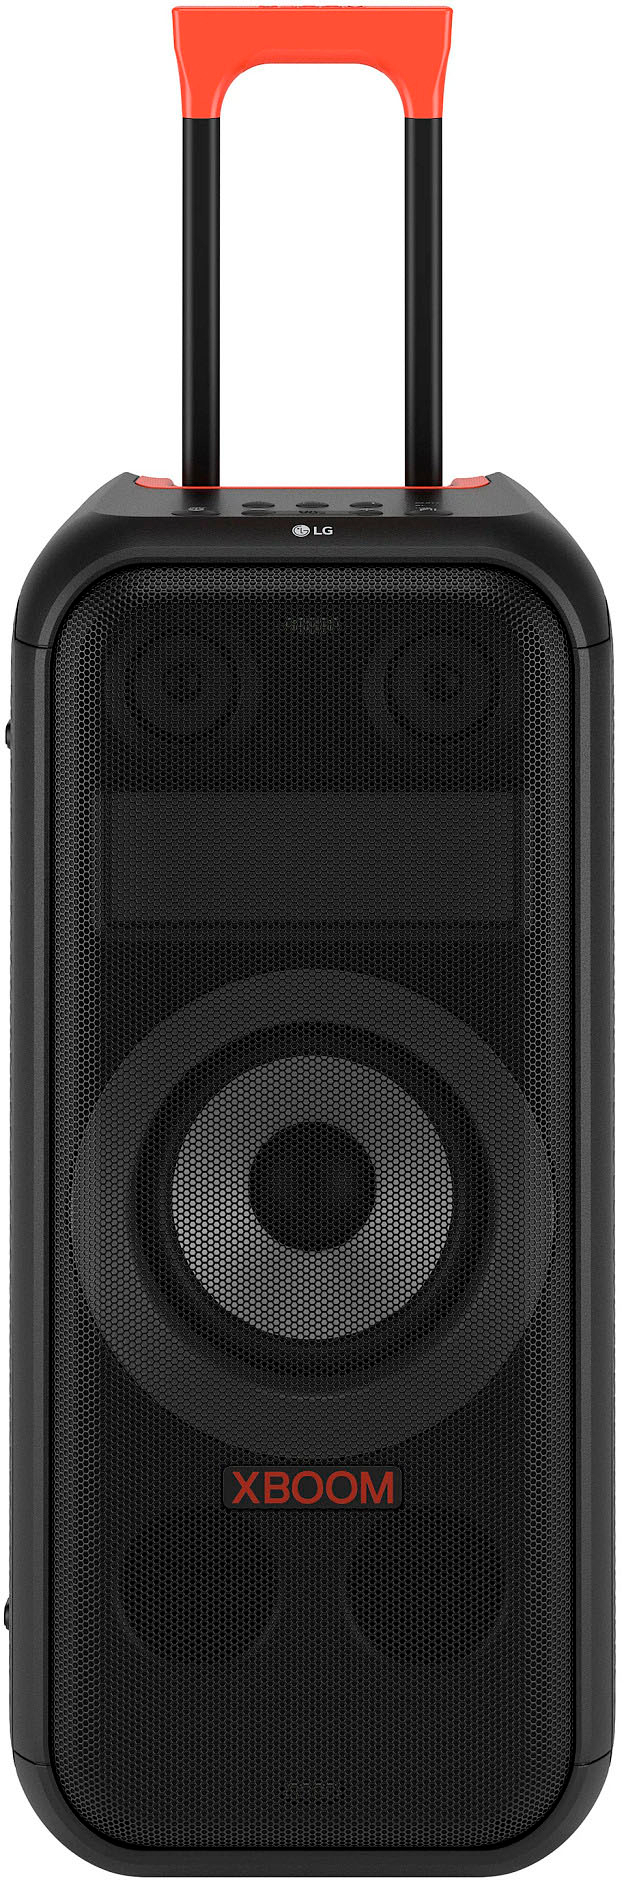 LED - LG XL7 Best Buy Party Pixel Speaker Portable XBOOM XL7S Tower with Black